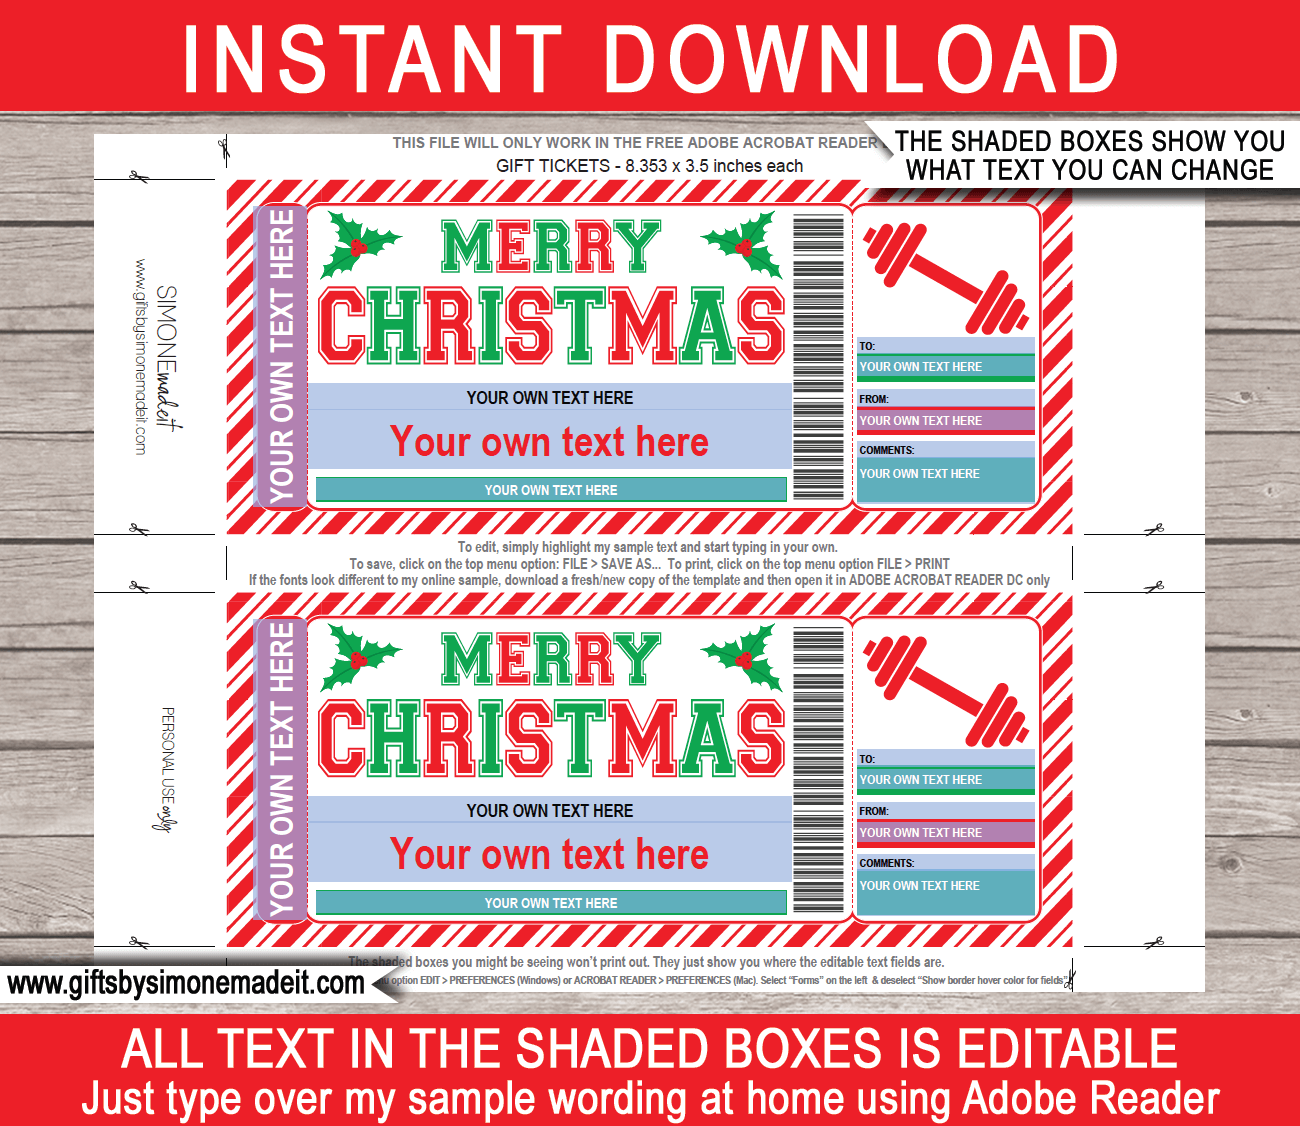 https://www.giftsbysimonemadeit.com/wp-content/uploads/2021/09/Christmas-Gym-Gift-Ticket-Template-editable-text.png